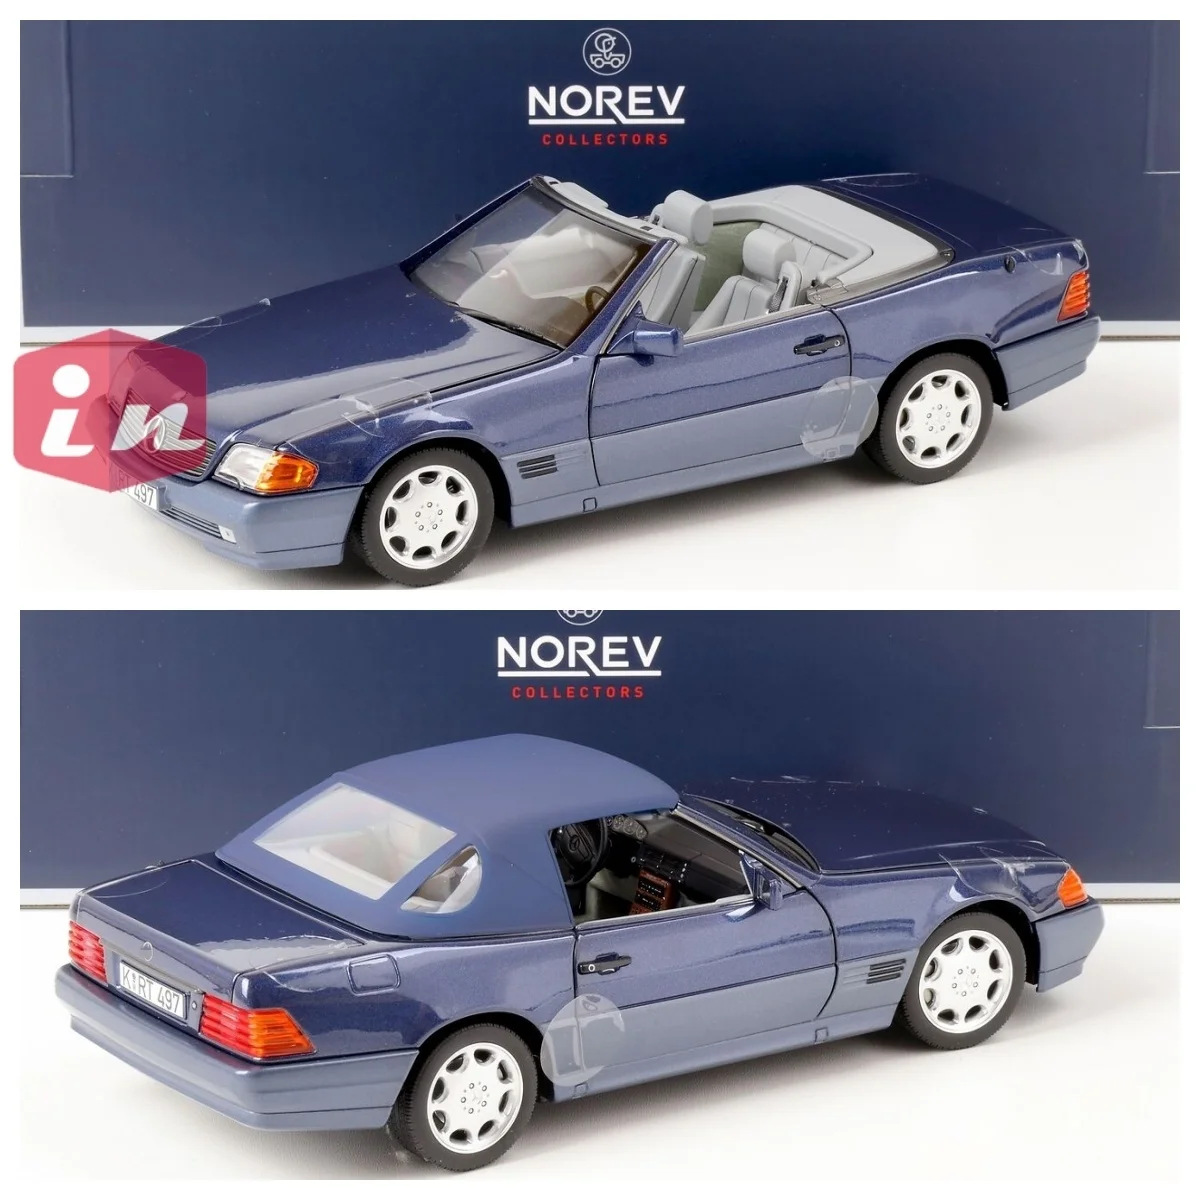 

1989 1:18 Norev 500SL Cabriolet R129 Blue Metallic DieCast Model Car Collection Limited Edition Hobby Toy Car